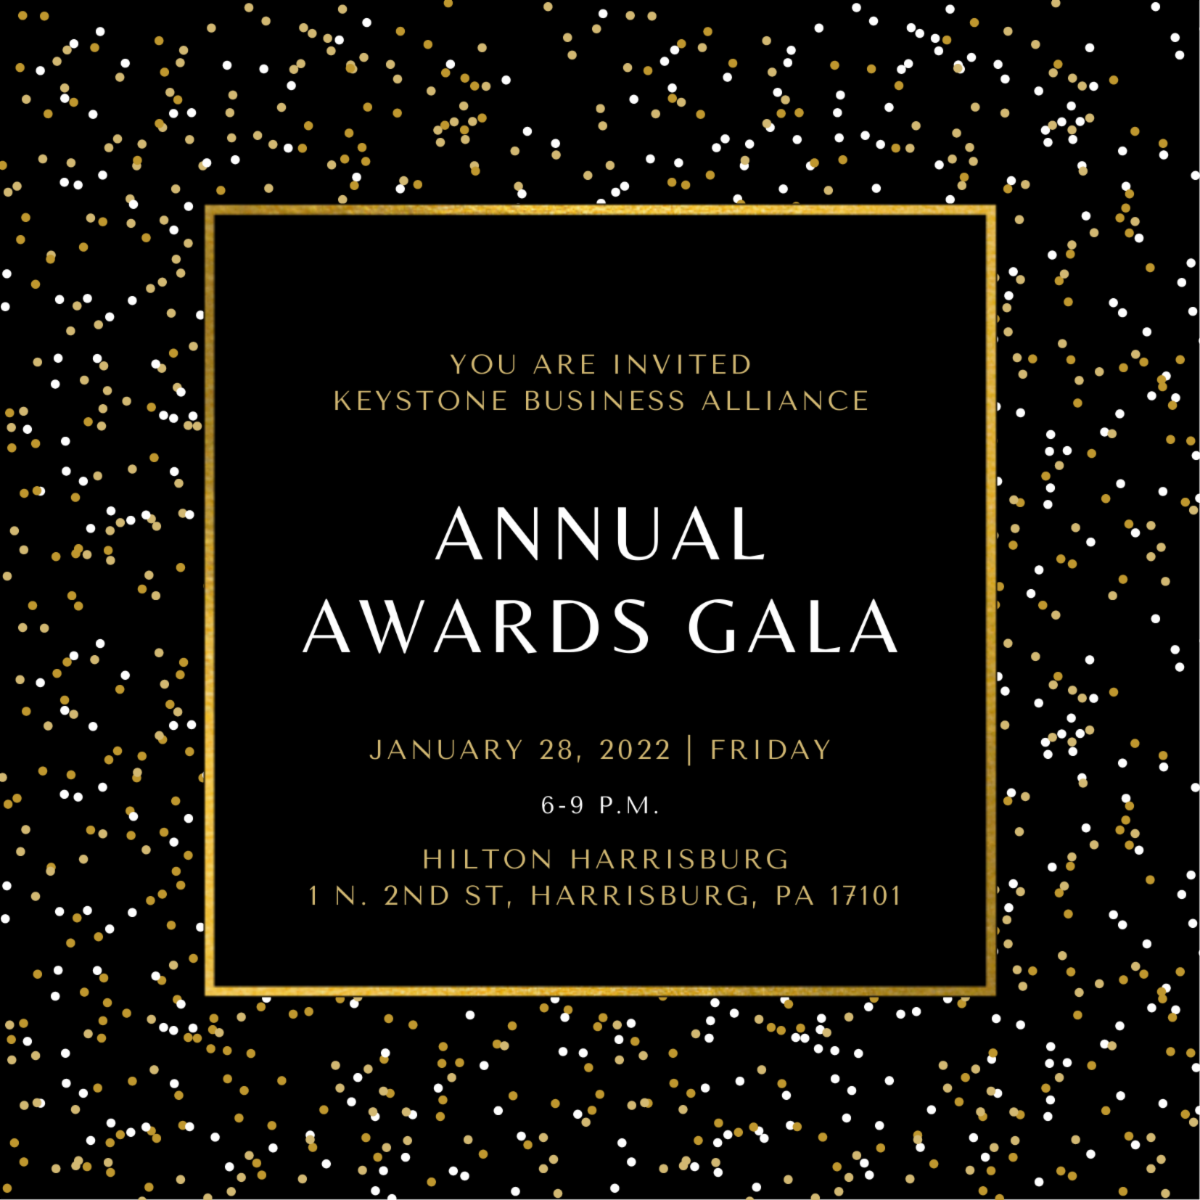 Annual Awards Gala details